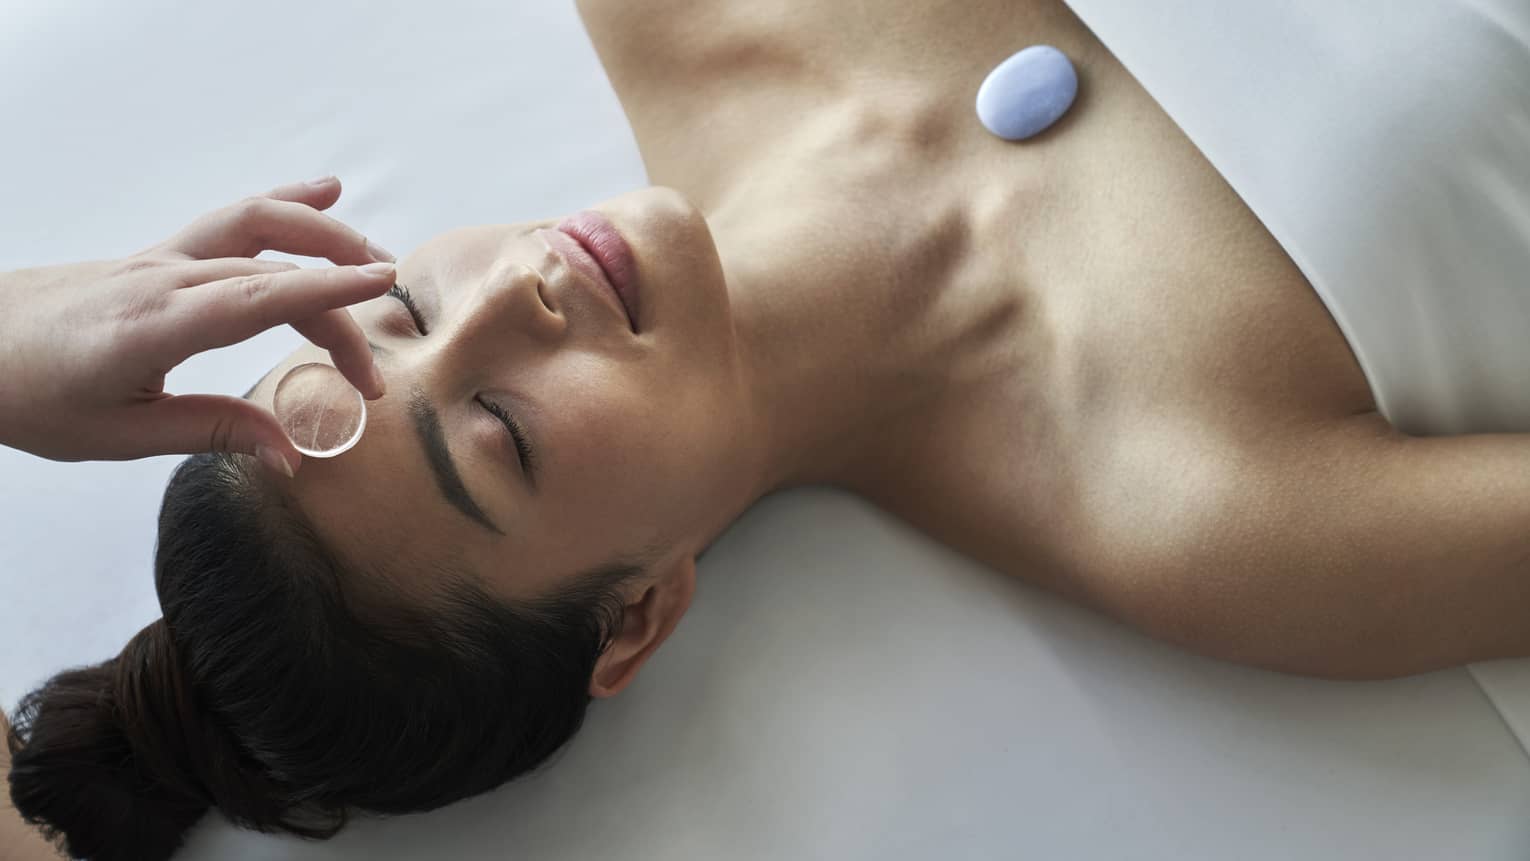 Spa staff places clear stone on woman as she lays on spa table, stone on chest